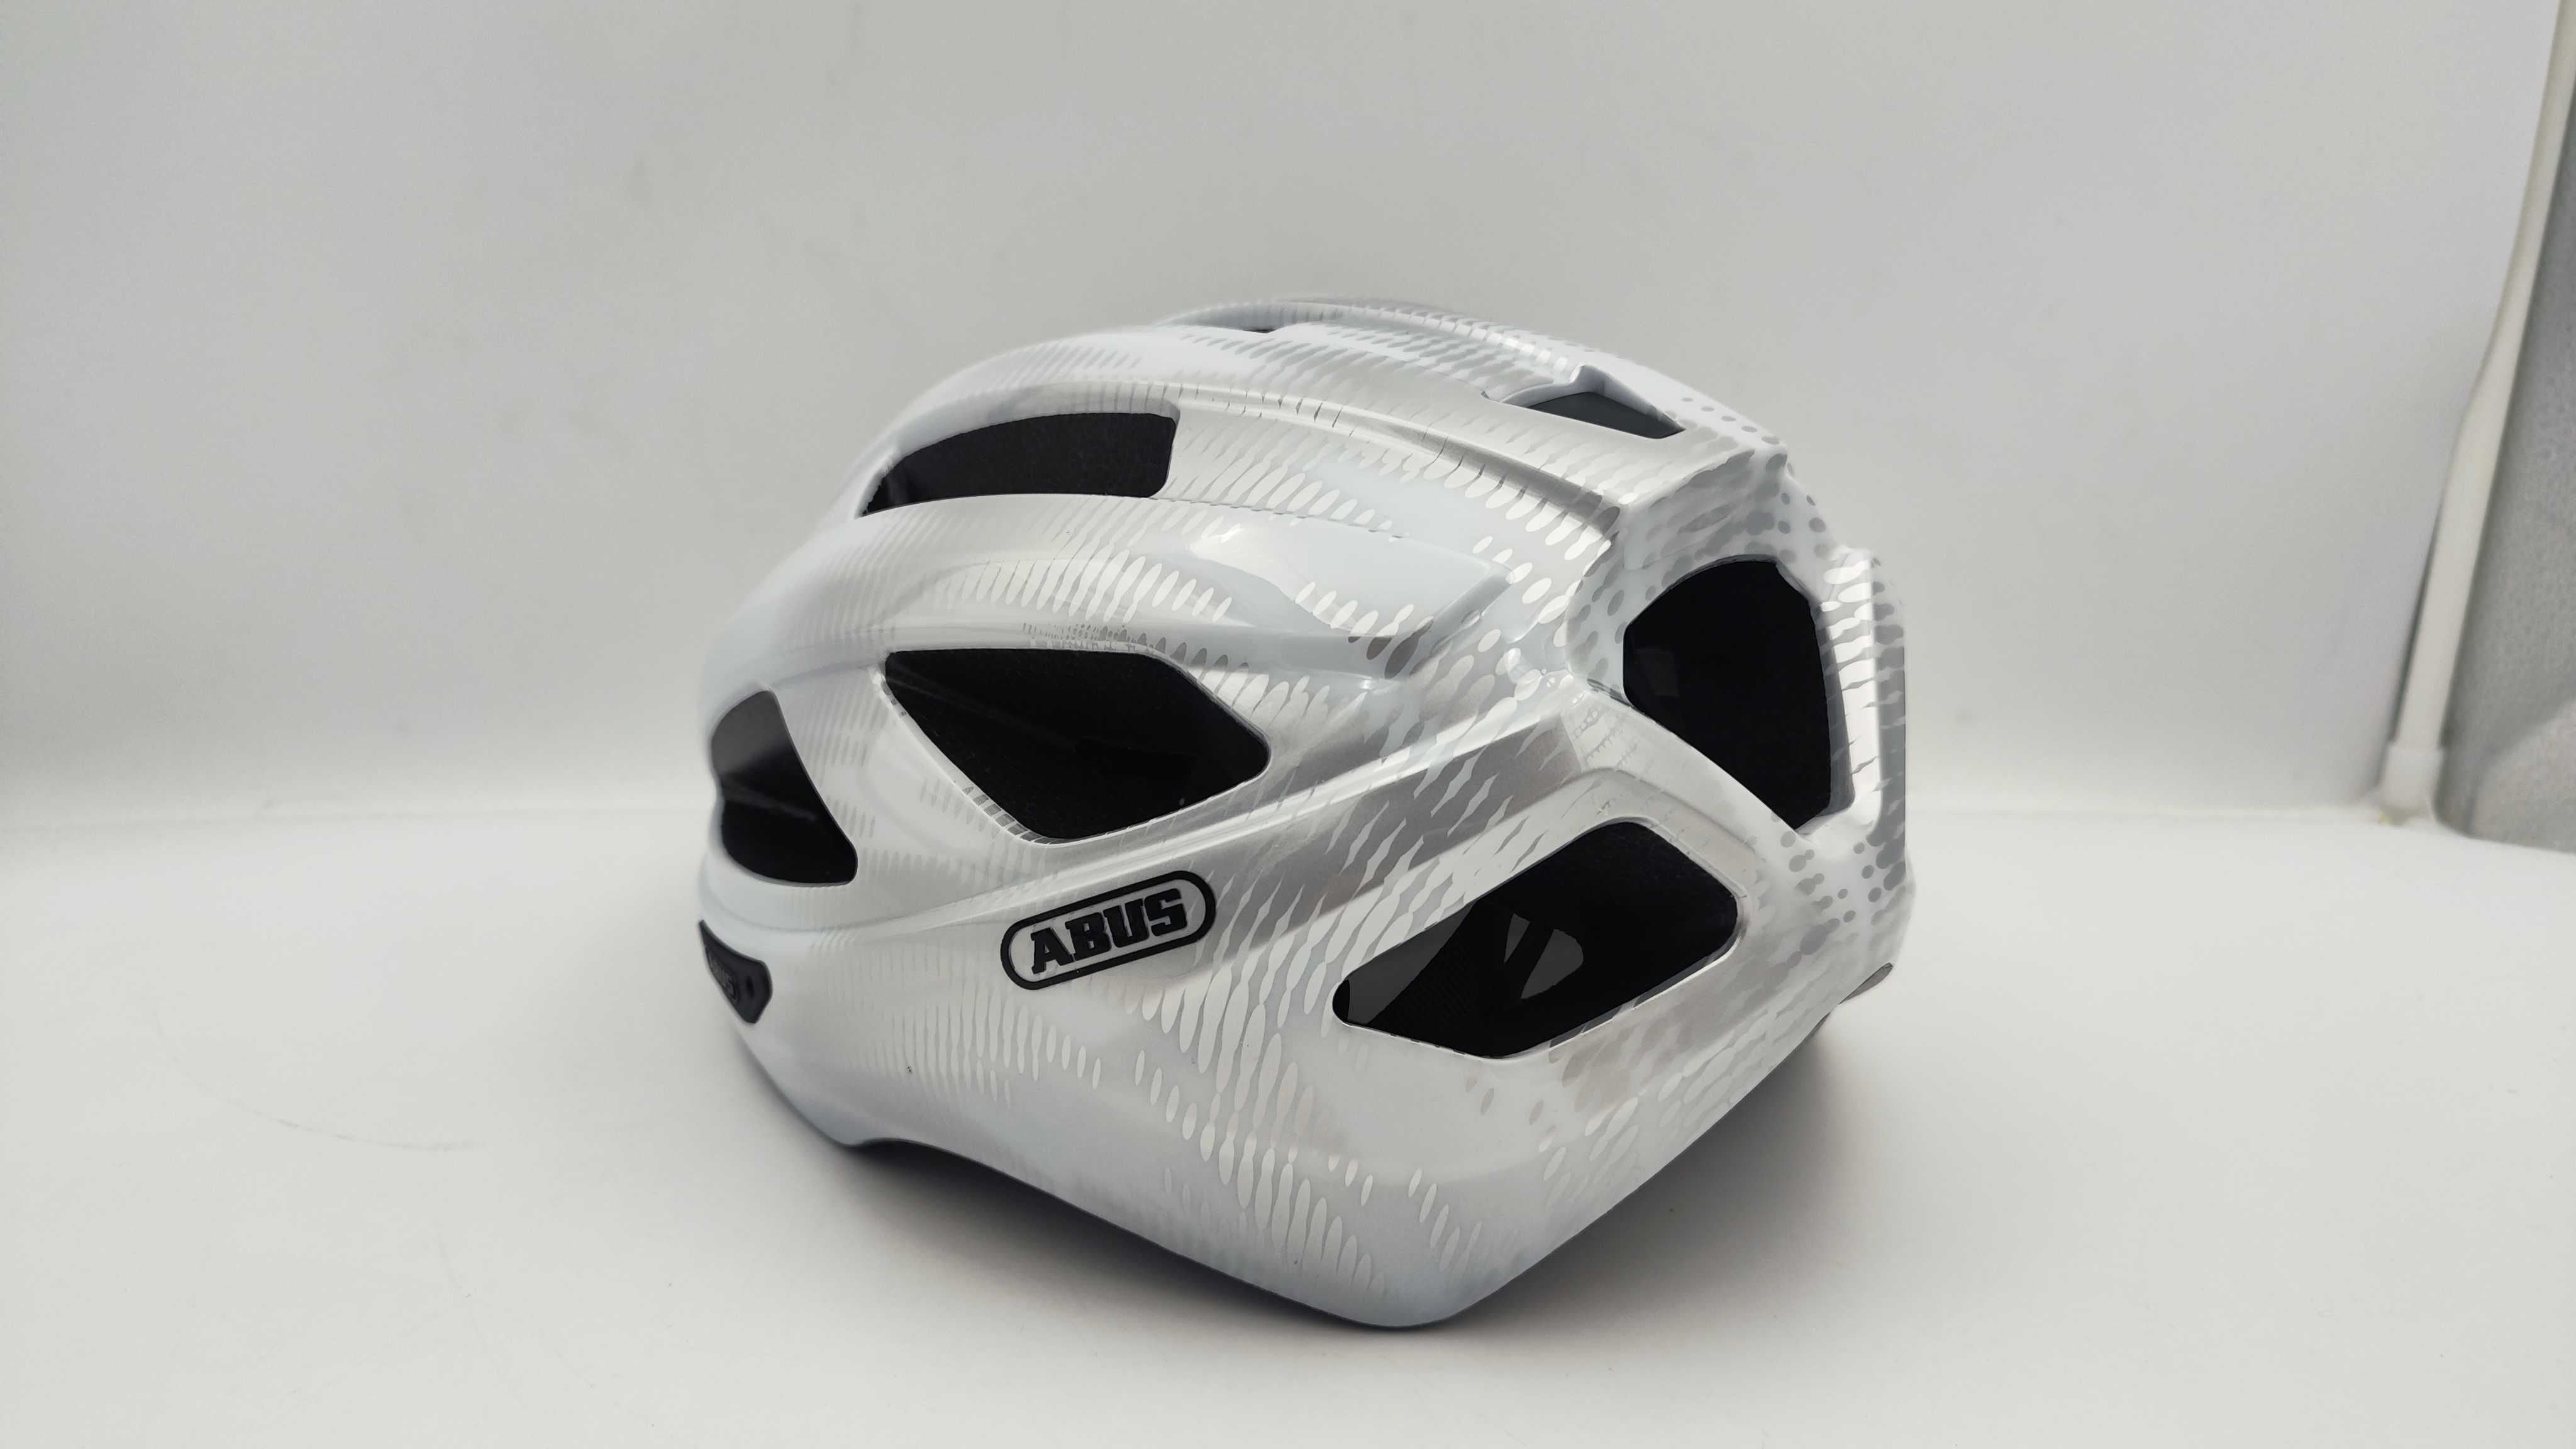 Kask rowerowy Abus Macator r. L 58-62 cm (AG32)